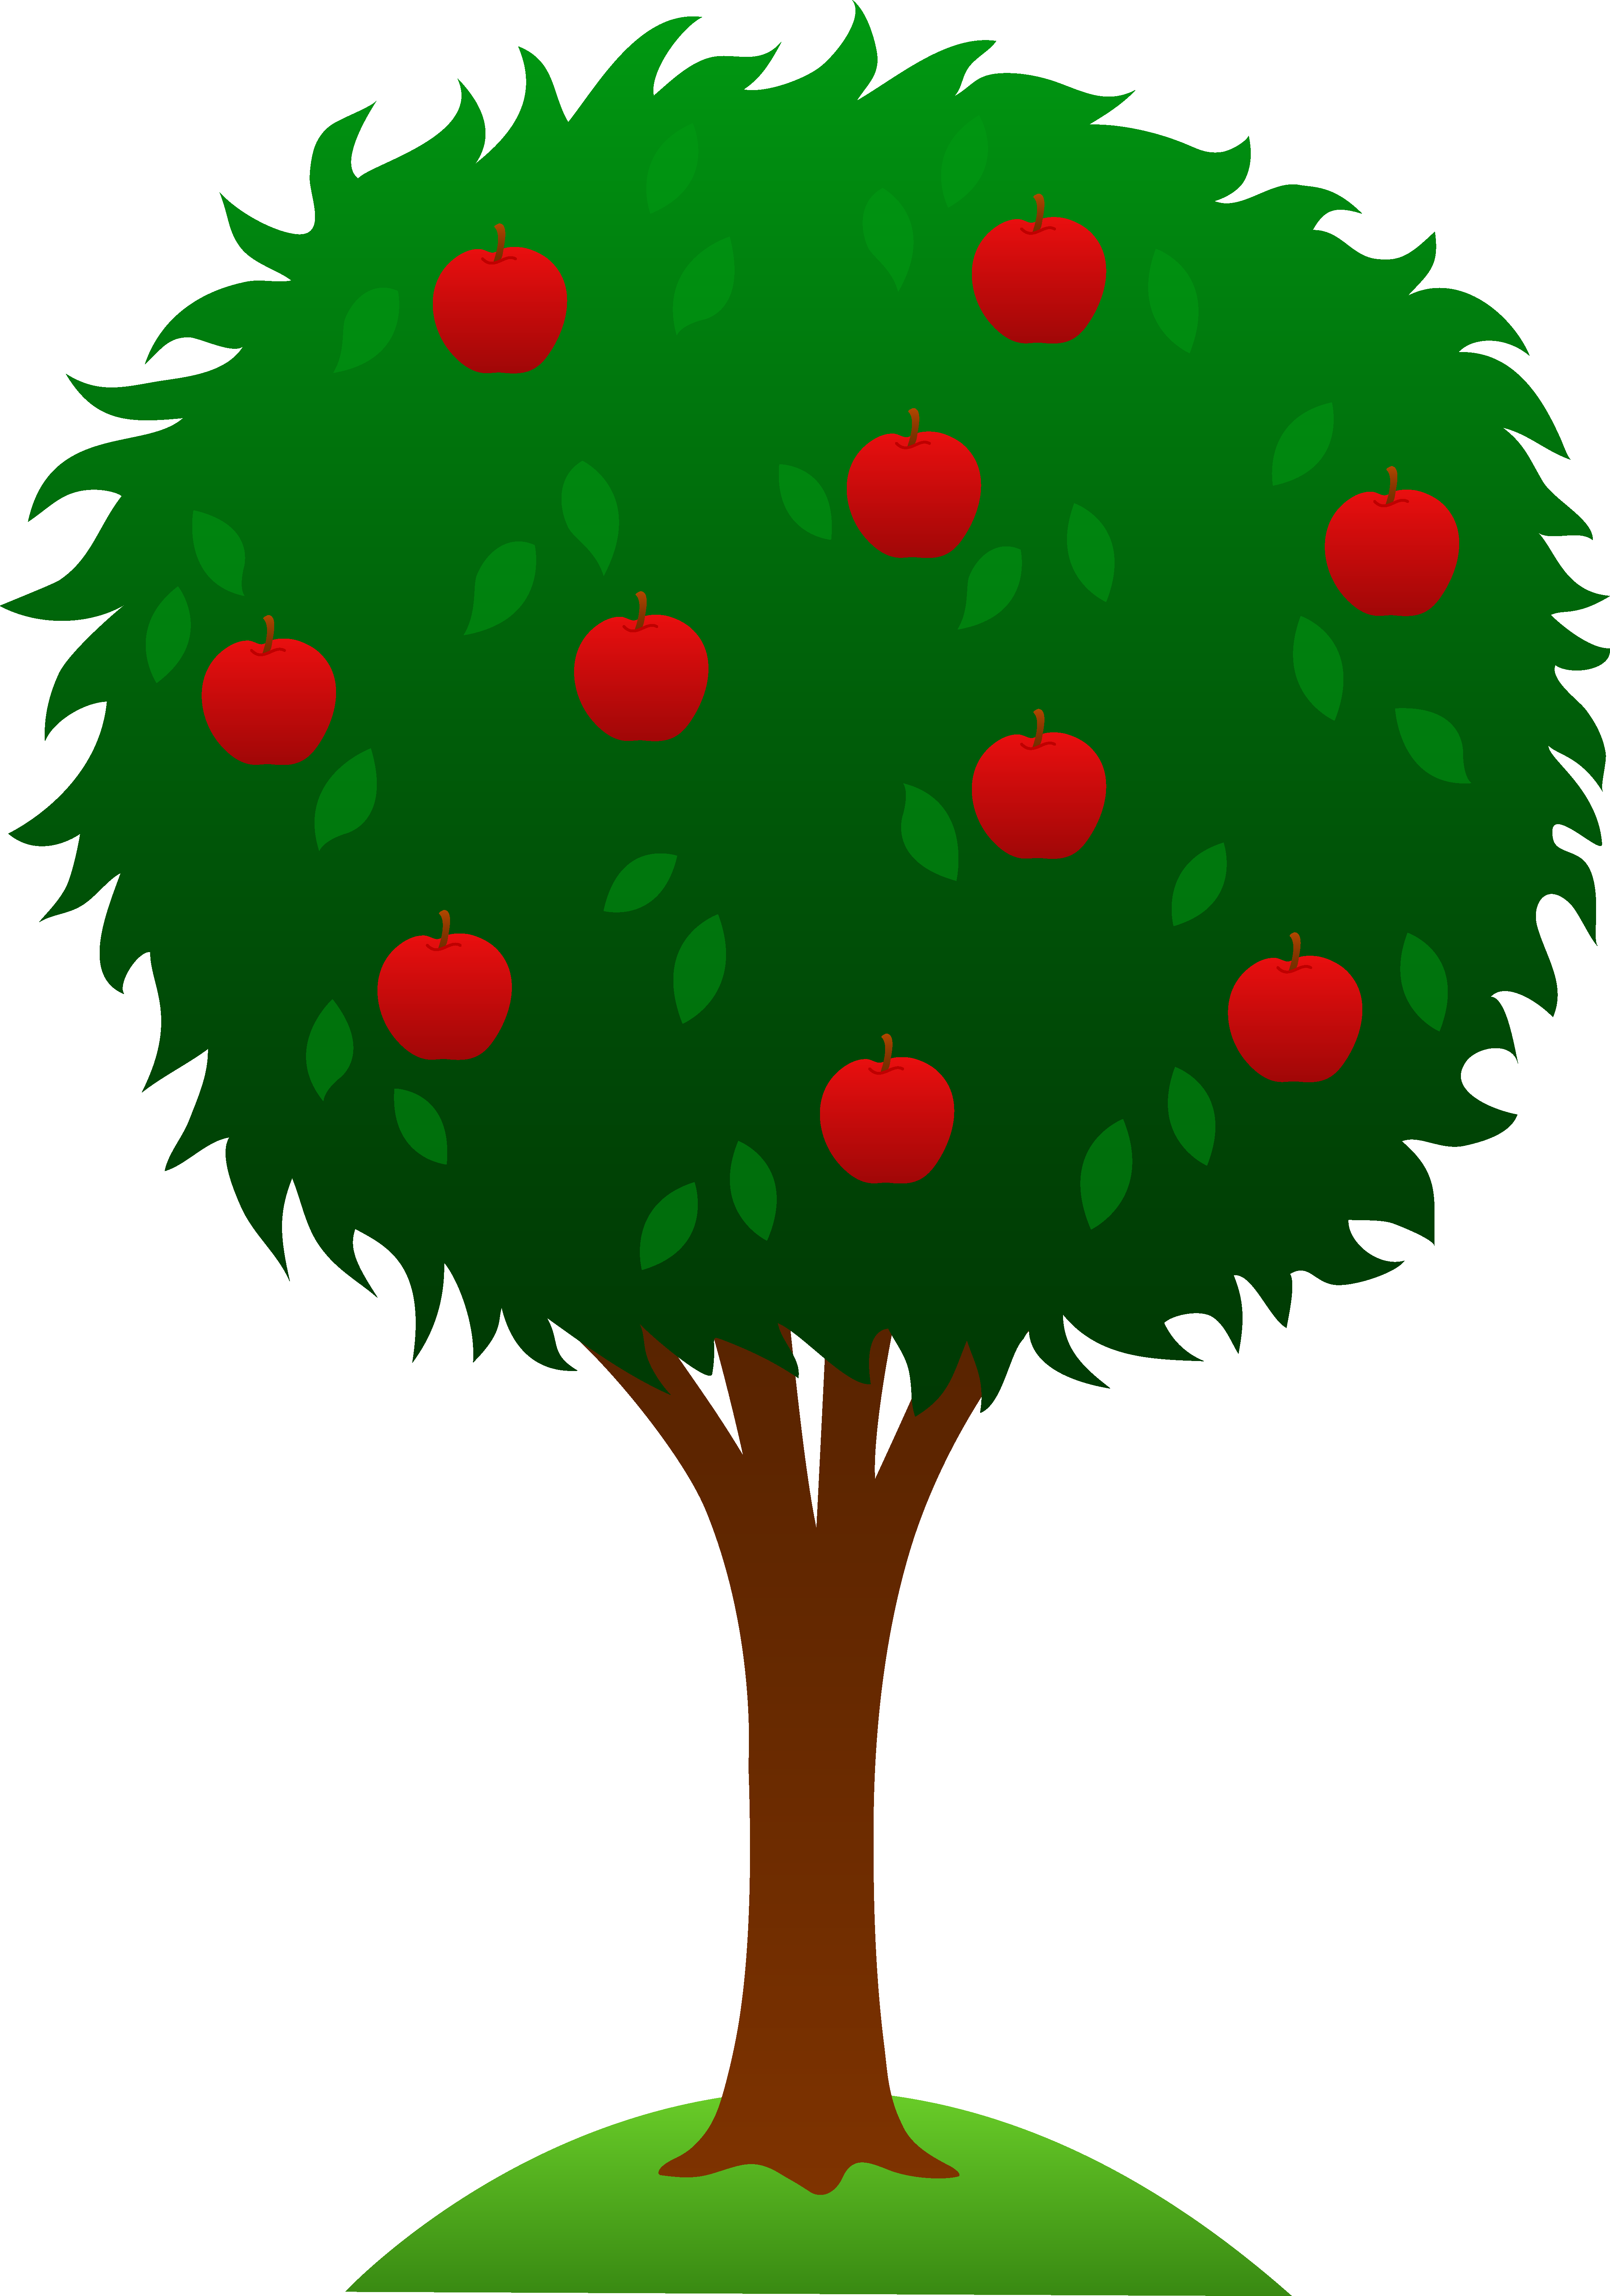 Orange Tree Clipart | Clipart library - Free Clipart Images